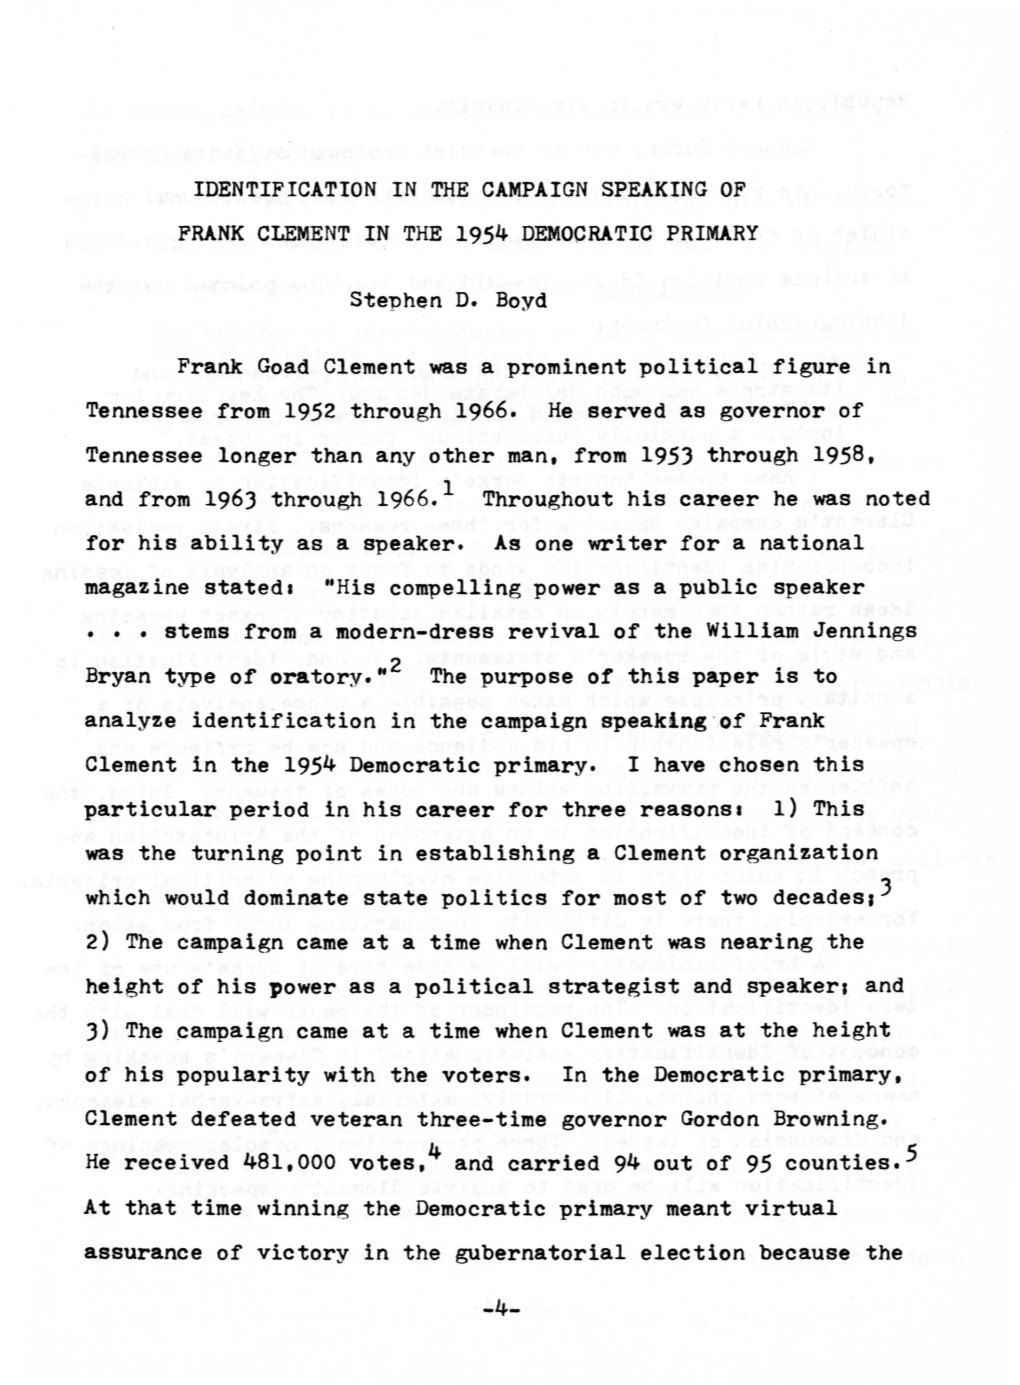 Identification in the Campaign Speaking of Frank Clement in the 1954 Democratic Primary